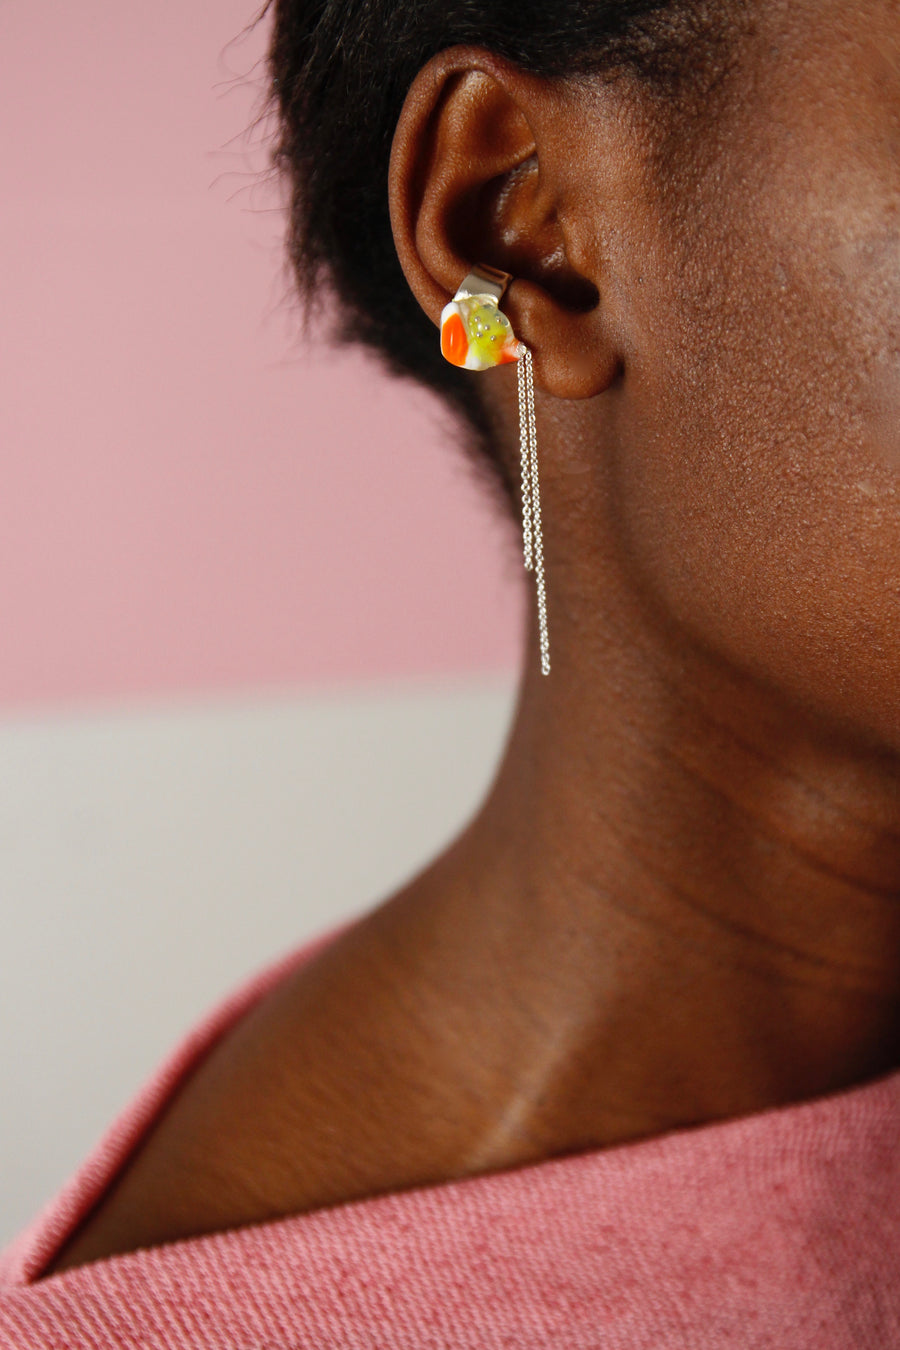 Woman wearing a unique Handcrafted Dangling Ear Cuff by Gré in citrus colours with sterling silver